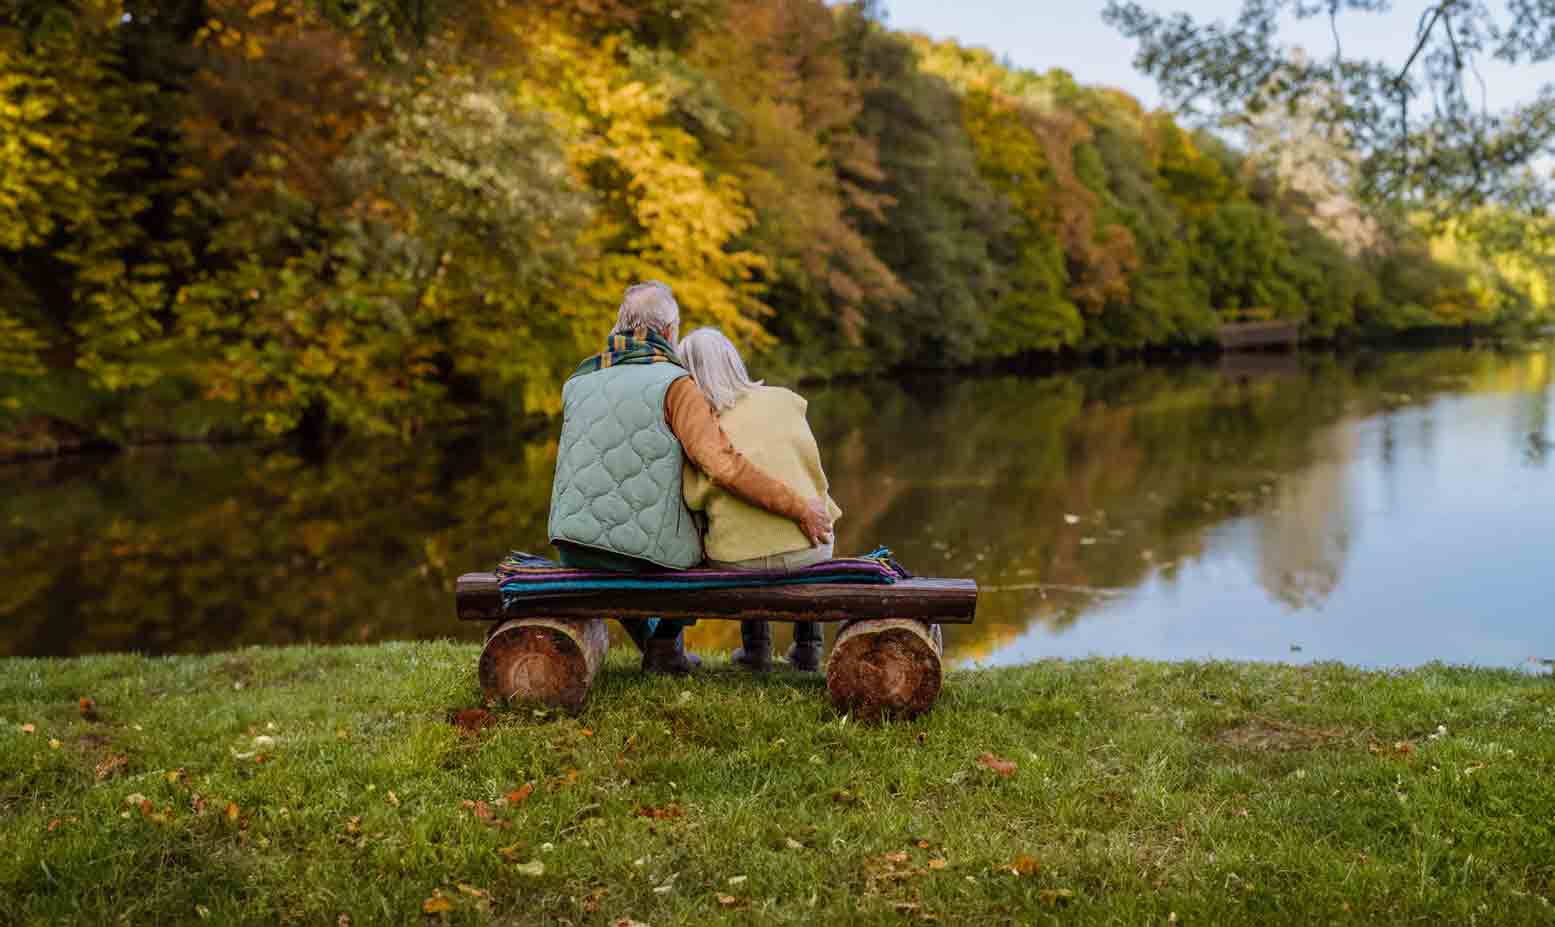 Two people sat on a bench looking out over a lake in autumn